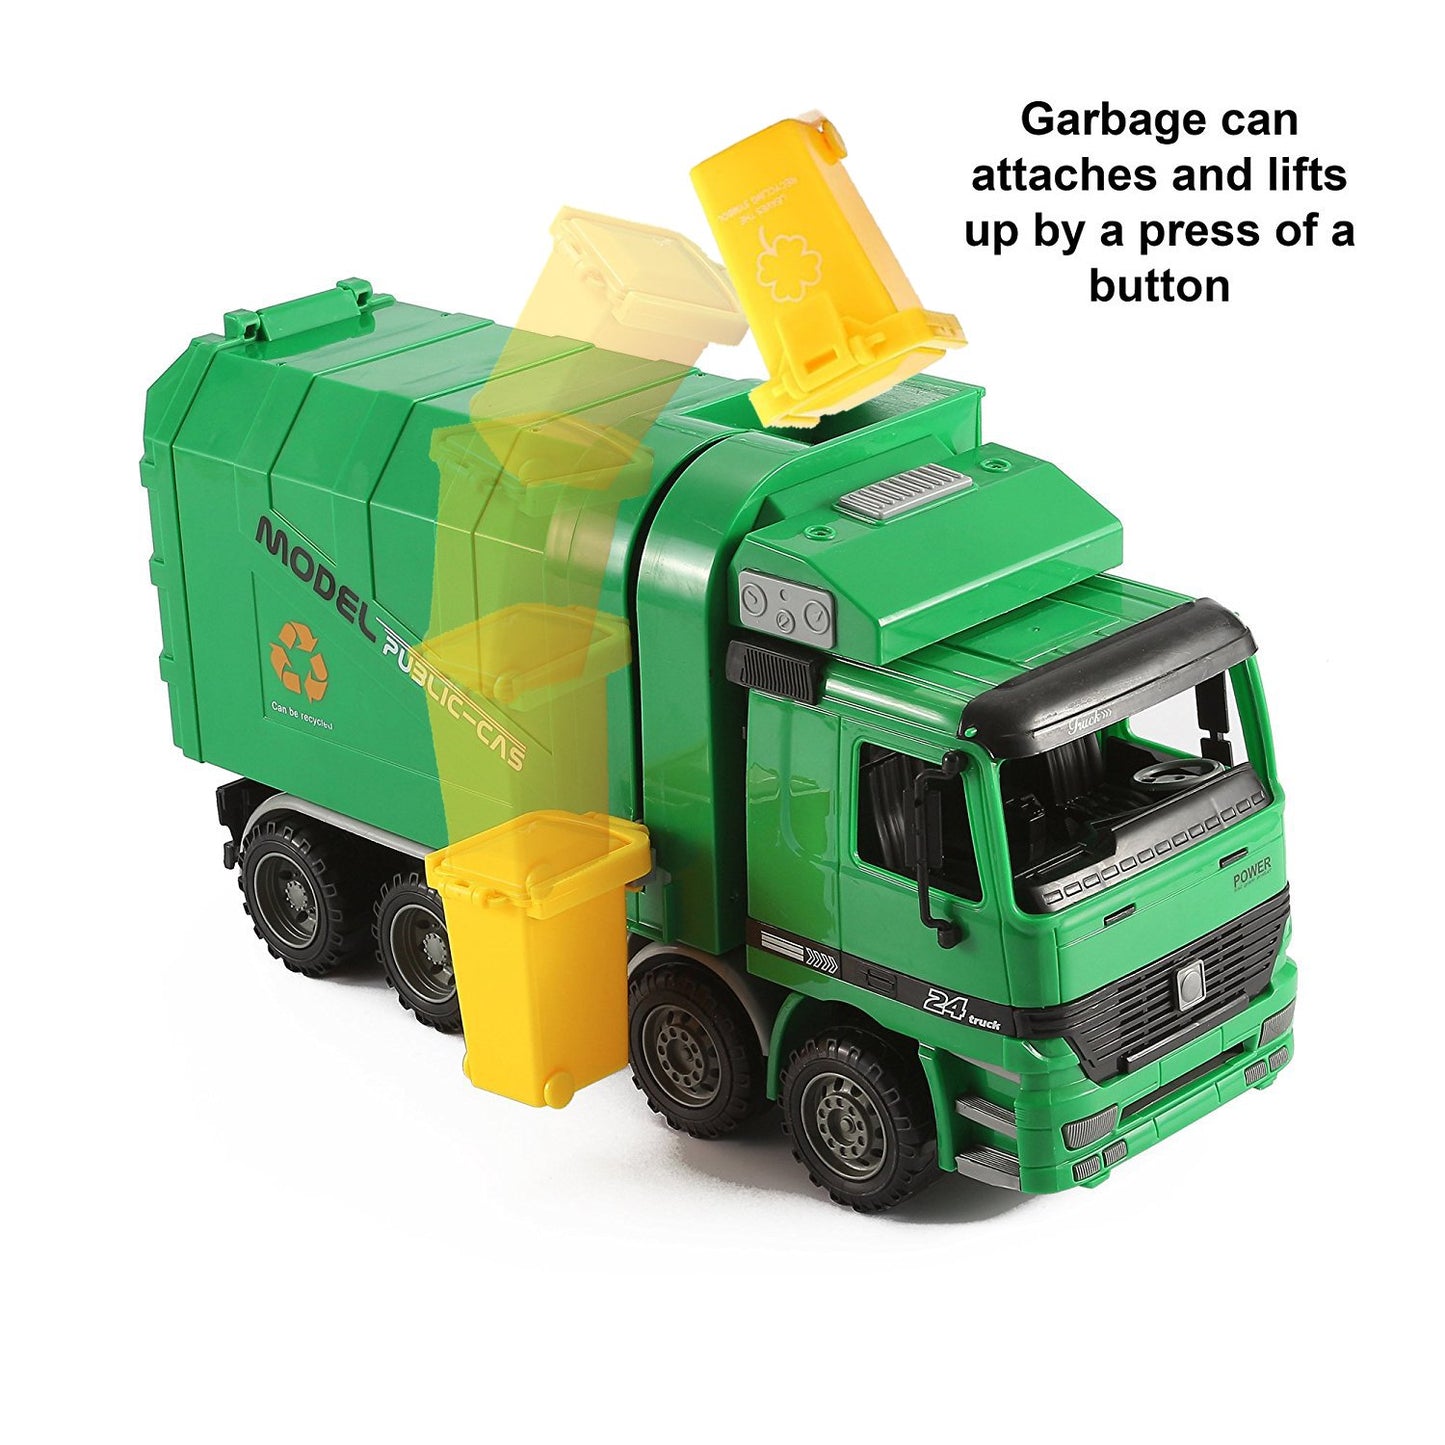 14" Oversized Friction Powered Recycling Garbage Truck Toy for Kids with Side Loading and Back Dump